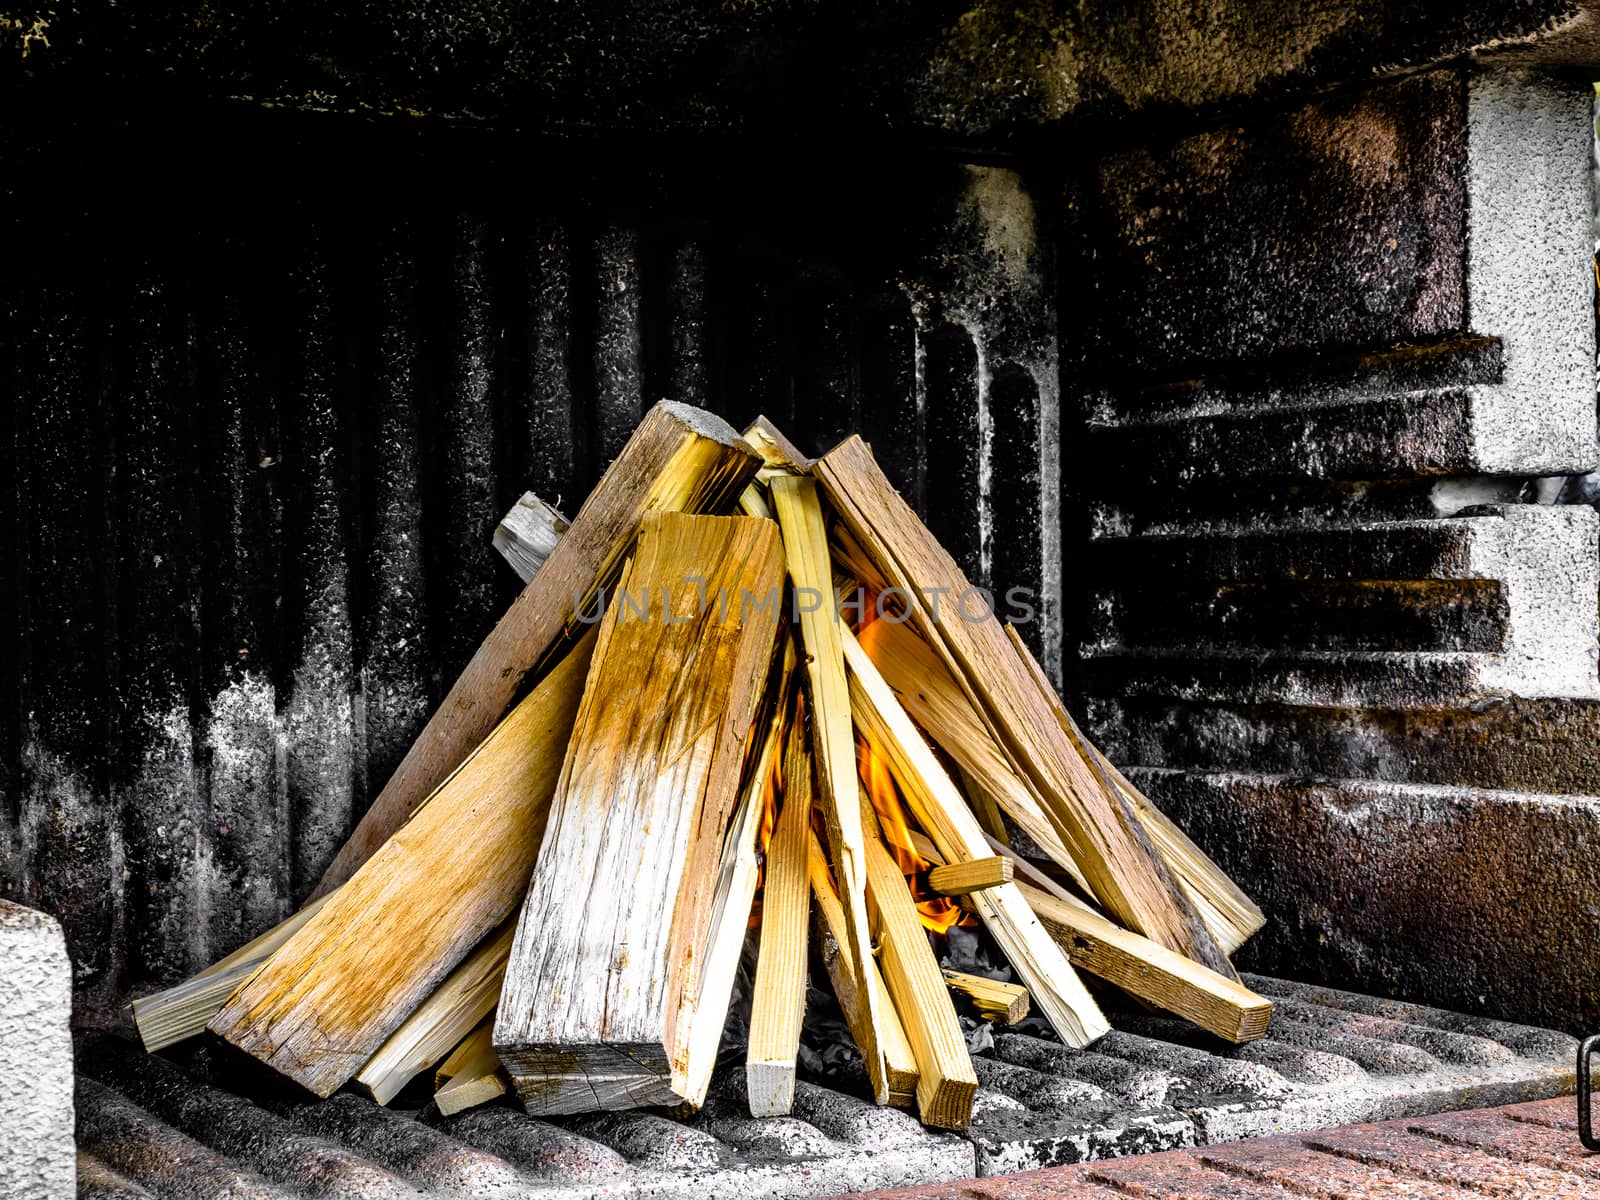 Preparation of a BBQ - wood piled up - fire starting to burn up on the bottom